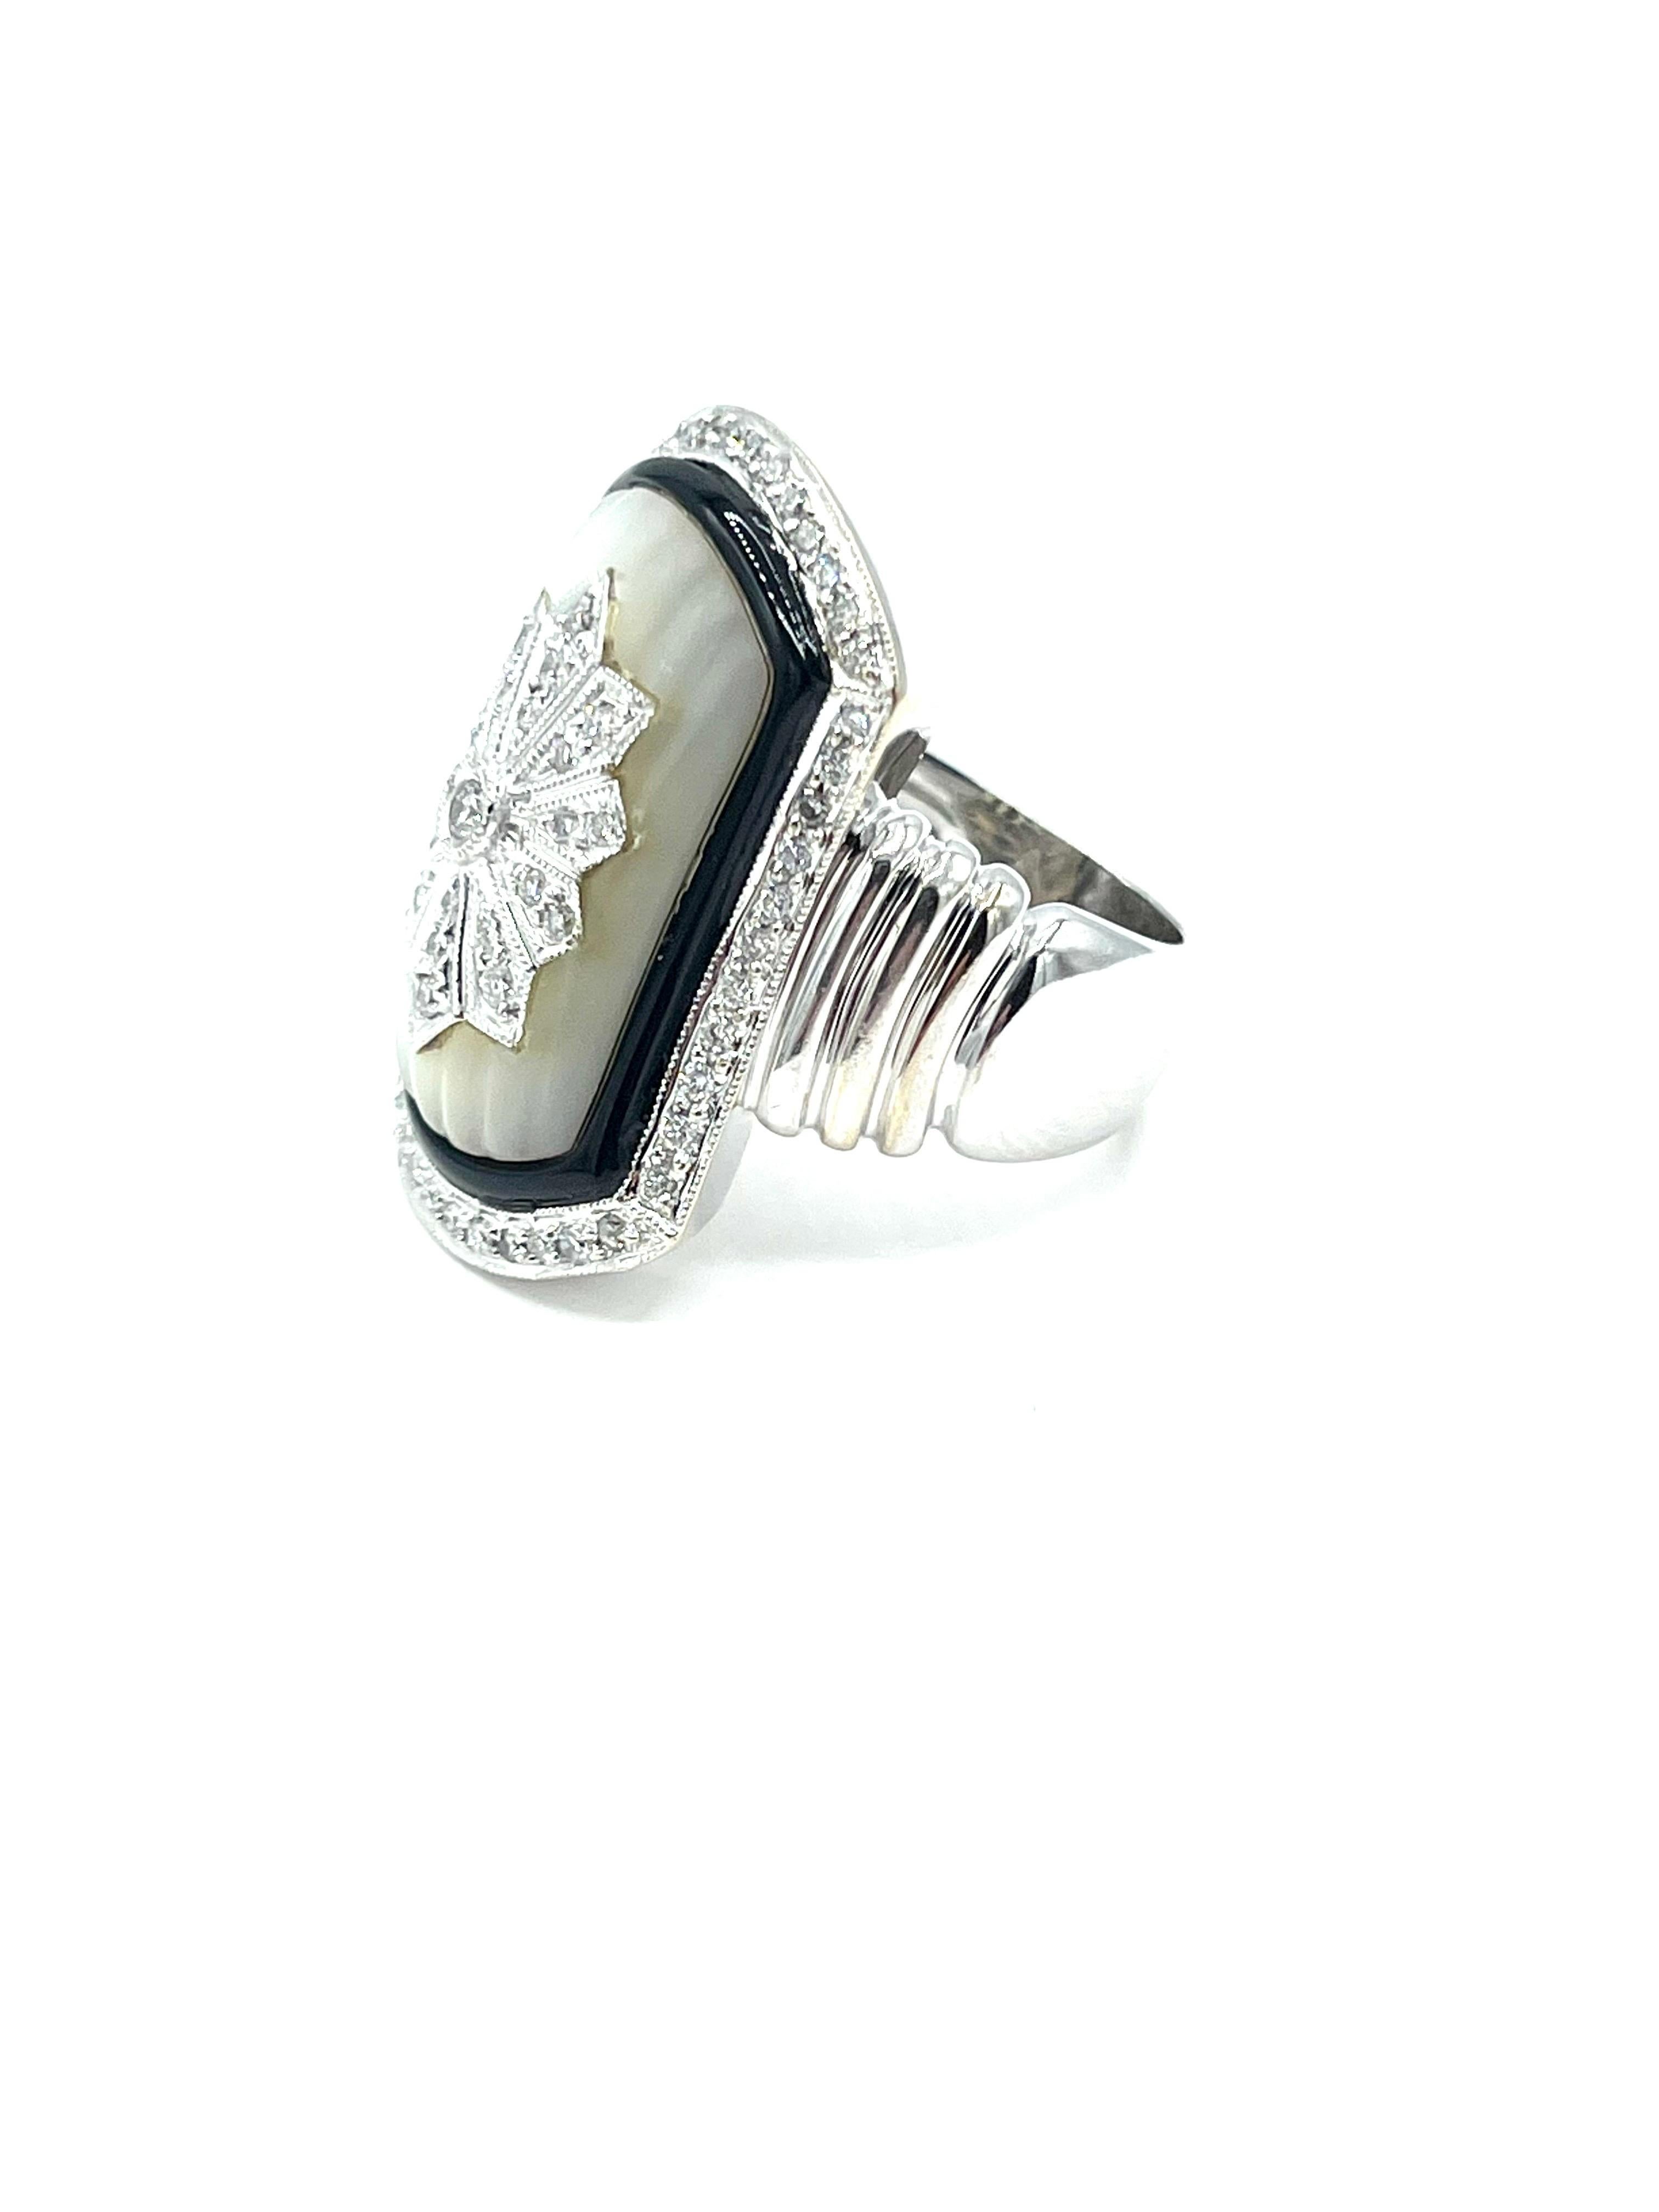 Diamond Mother of Pearl and Onyx 18K White Gold Cocktail Ring For Sale 1